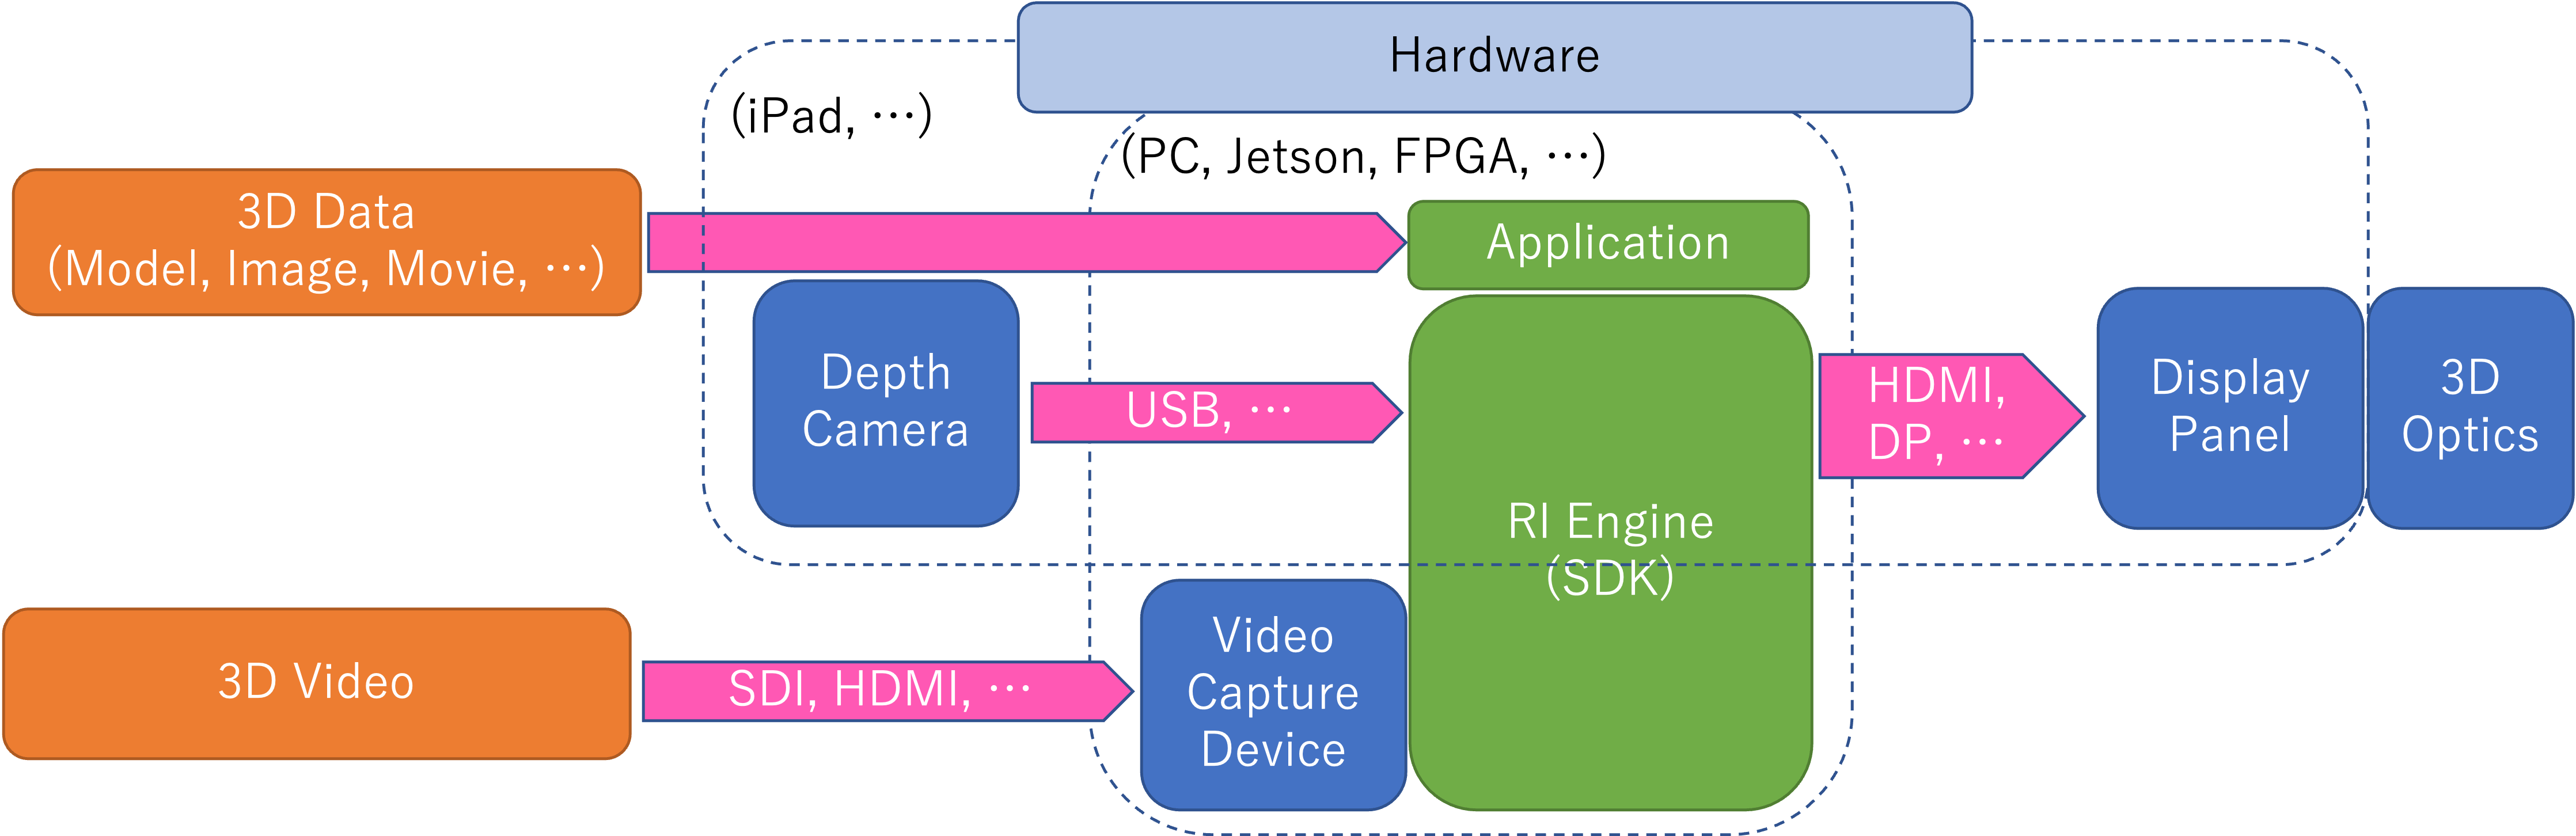 System Architecture of our 3D Display